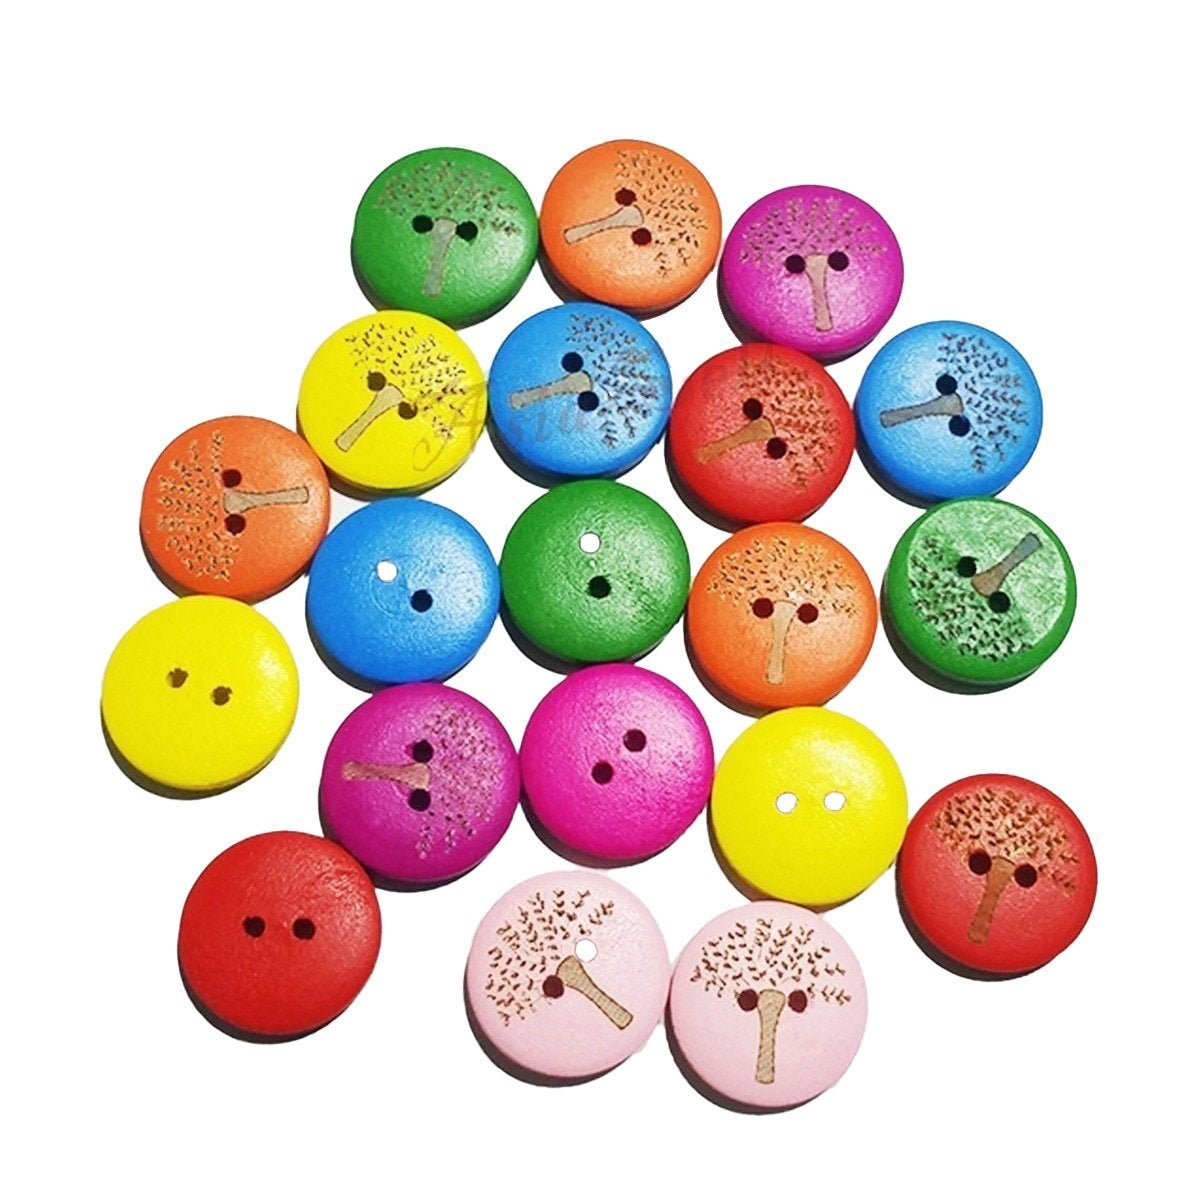 25pcs Wooden Buttons Tree Design for Clothing Craft Sewing DIY 2 Hole 20mm - Mixed colours - - Asia Sell